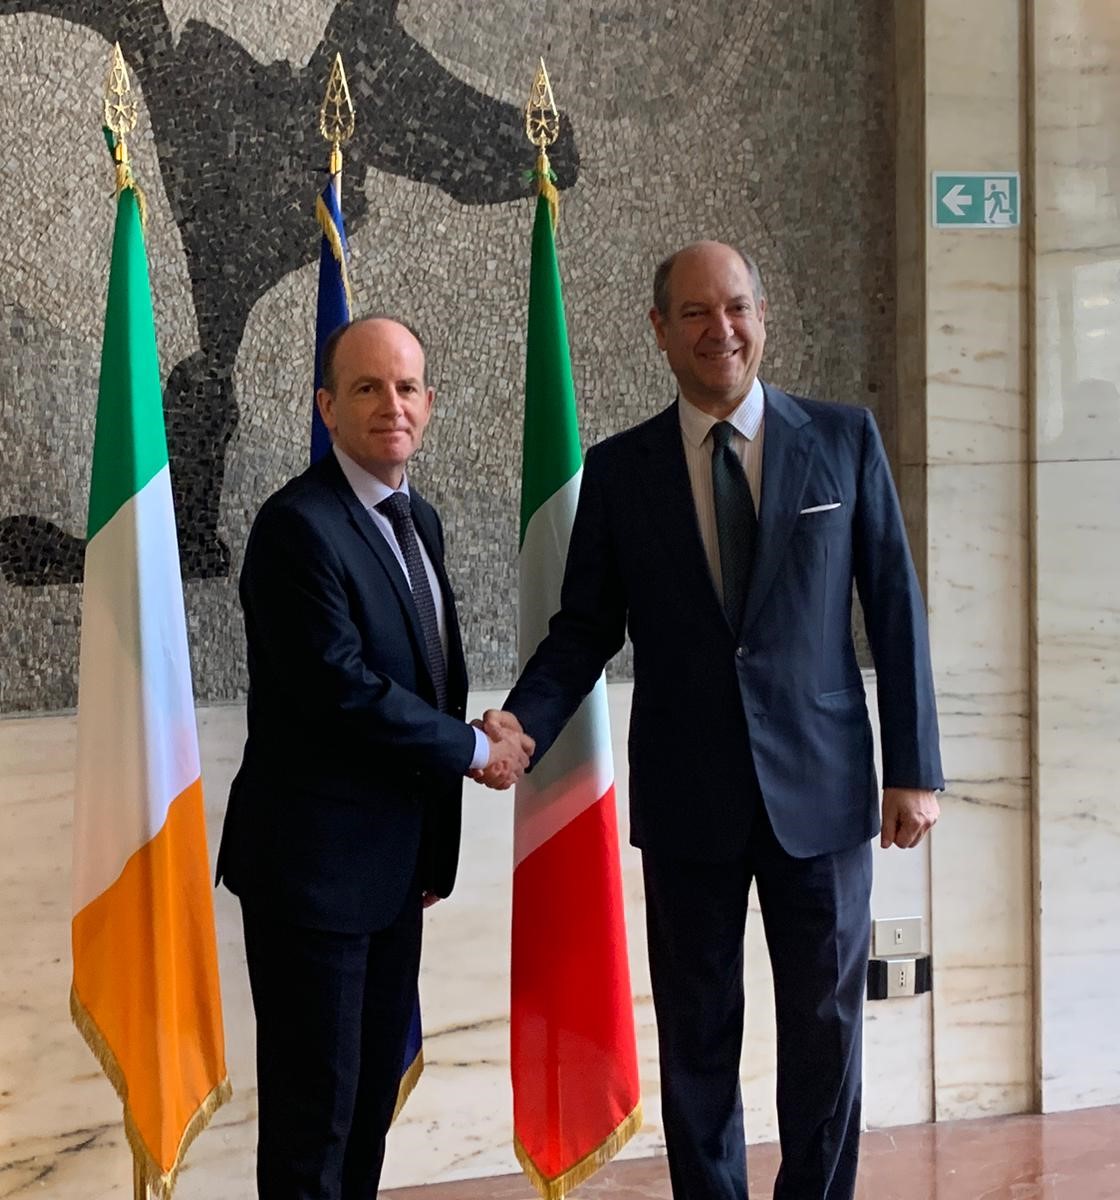 Today during his visit to Rome 🇮🇪 Secretary General Hackett met 🇮🇹 Secretary General Guariglia for an exchange on bilateral relations between our countries and #EU and international issues. Grazie @ItalyMFA per l'accoglienza 🇮🇪🤝🇮🇹